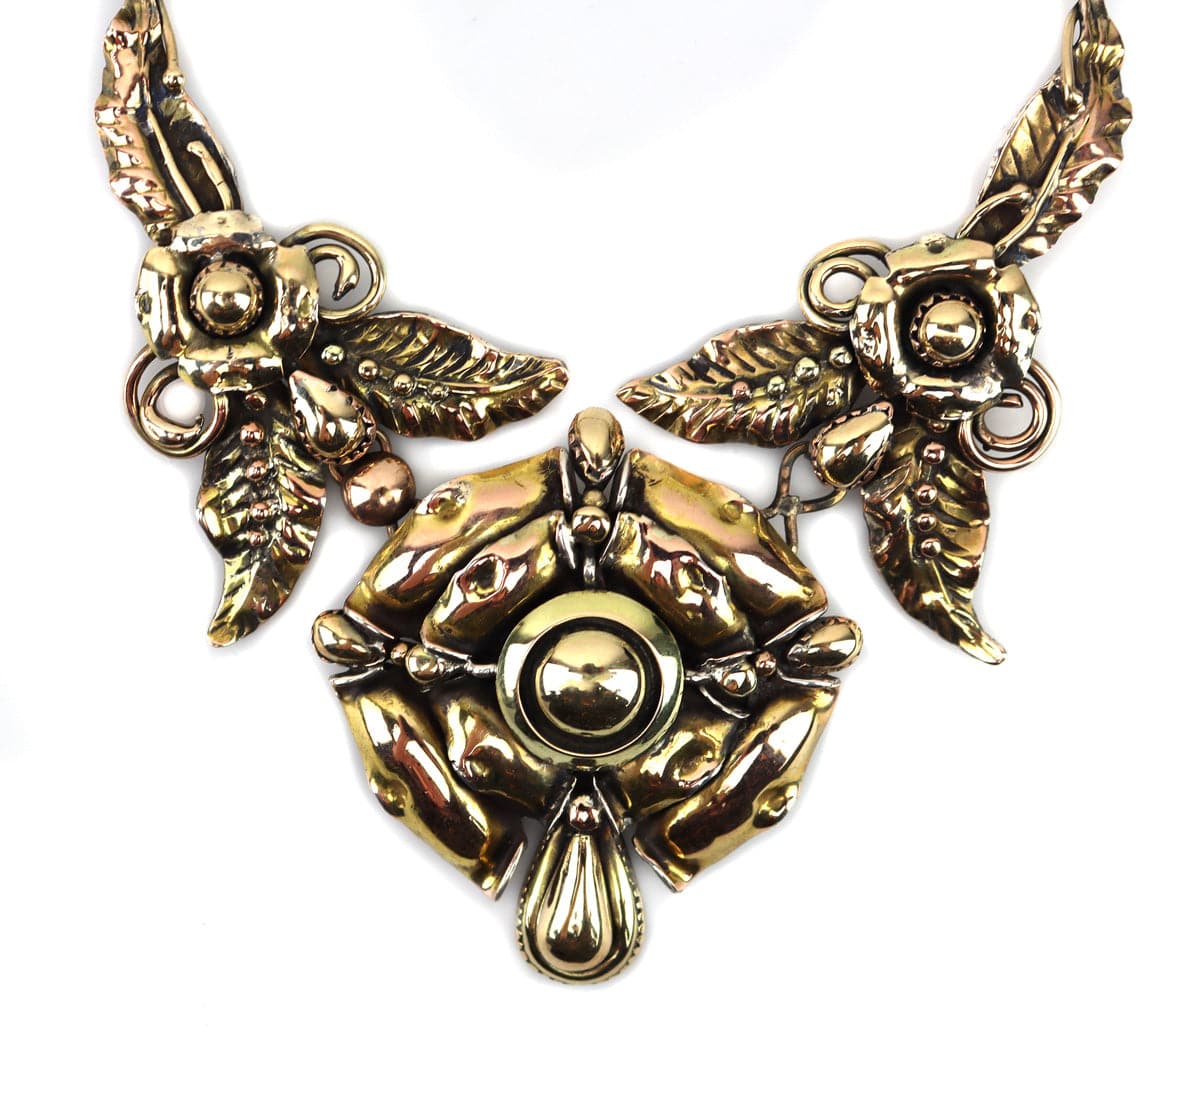 Frank Patania Sr. (1899-1964) and Thunderbird Shop - 14K Gold Overlay and Sterling Silver Necklace with Pendant/Pin, Clip-on Earrings, and Pair of Cuff Bracelets with Floral Design c. 1948 (J91699-0322-001) 5